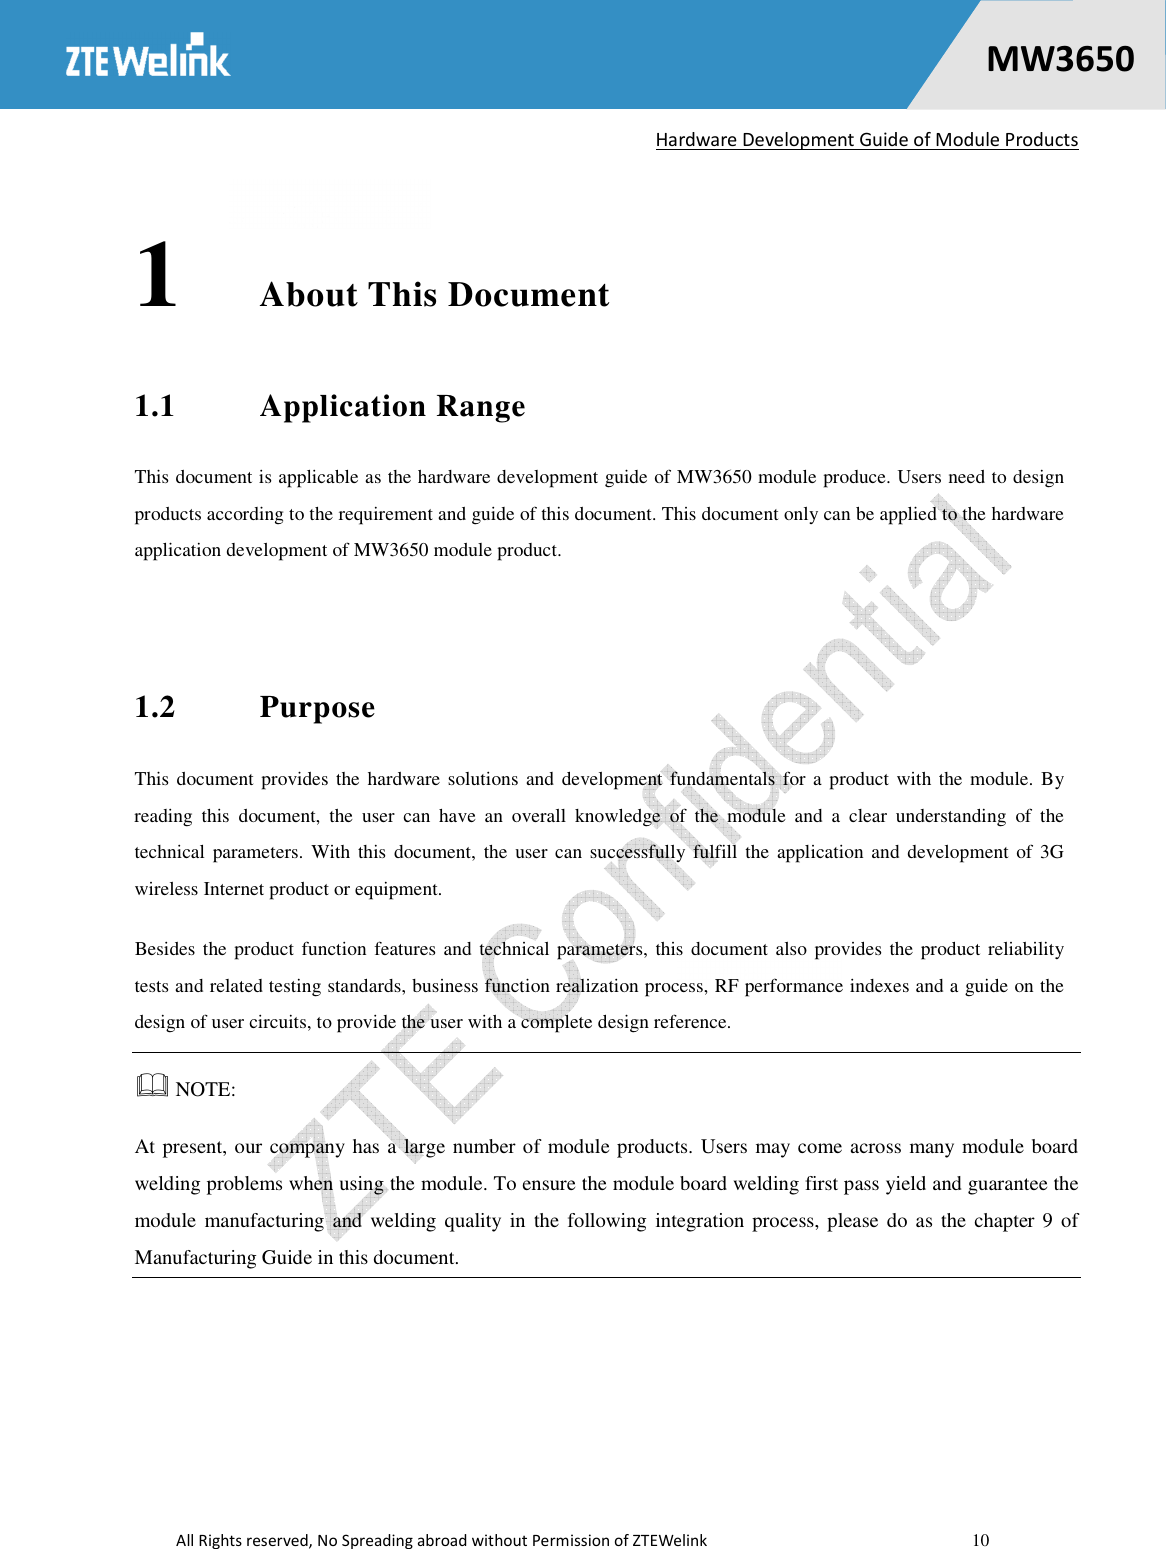   Hardware Development Guide of Module Products  All Rights reserved, No Spreading abroad without Permission of ZTEWelink    10    MW36500 1 About This Document 1.1 Application Range This document is applicable as the hardware development guide of MW3650 module produce. Users need to design products according to the requirement and guide of this document. This document only can be applied to the hardware application development of MW3650 module product.  1.2 Purpose This document  provides the hardware solutions and  development fundamentals for a product with the module.  By reading  this  document,  the  user  can  have  an  overall  knowledge  of  the  module  and  a  clear  understanding  of  the technical  parameters.  With  this document,  the  user can successfully fulfill  the  application  and development  of 3G wireless Internet product or equipment. Besides the product  function features  and technical parameters,  this  document also provides the product reliability tests and related testing standards, business function realization process, RF performance indexes and a guide on the design of user circuits, to provide the user with a complete design reference.    NOTE:   At present, our company has a large number of module products. Users may come across many module board welding problems when using the module. To ensure the module board welding first pass yield and guarantee the module manufacturing and welding quality in  the following  integration process, please do  as the chapter 9 of Manufacturing Guide in this document.  